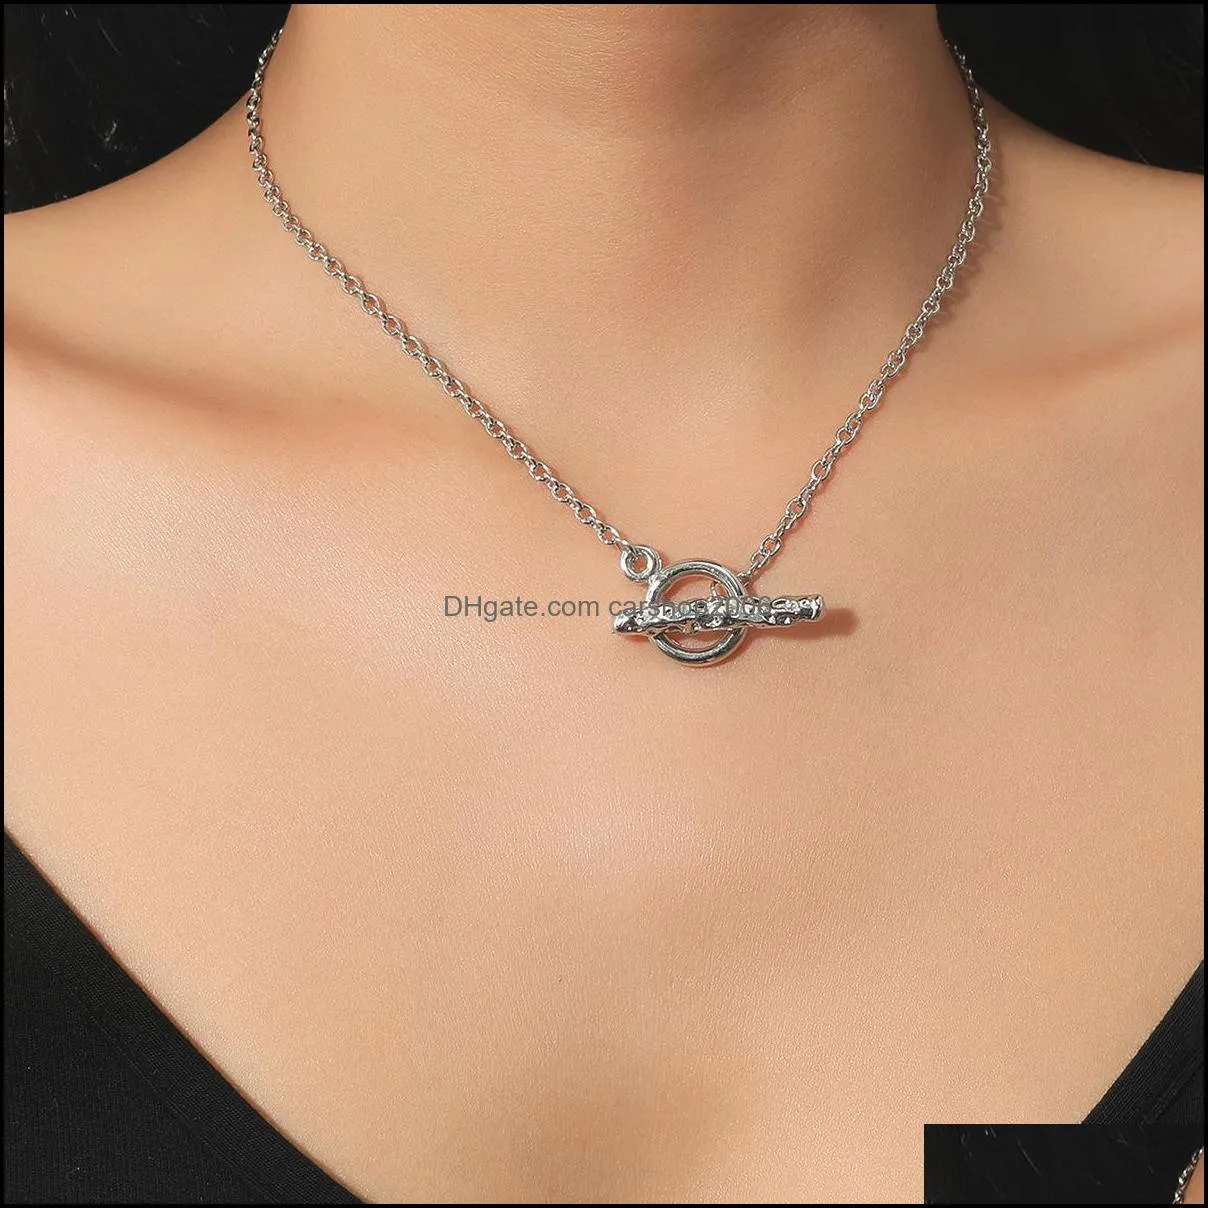 silver thick chains necklaces jewelry collarbone chain hip hop punk metal ot buckle short necklace design simple collar women necklace carshop2006